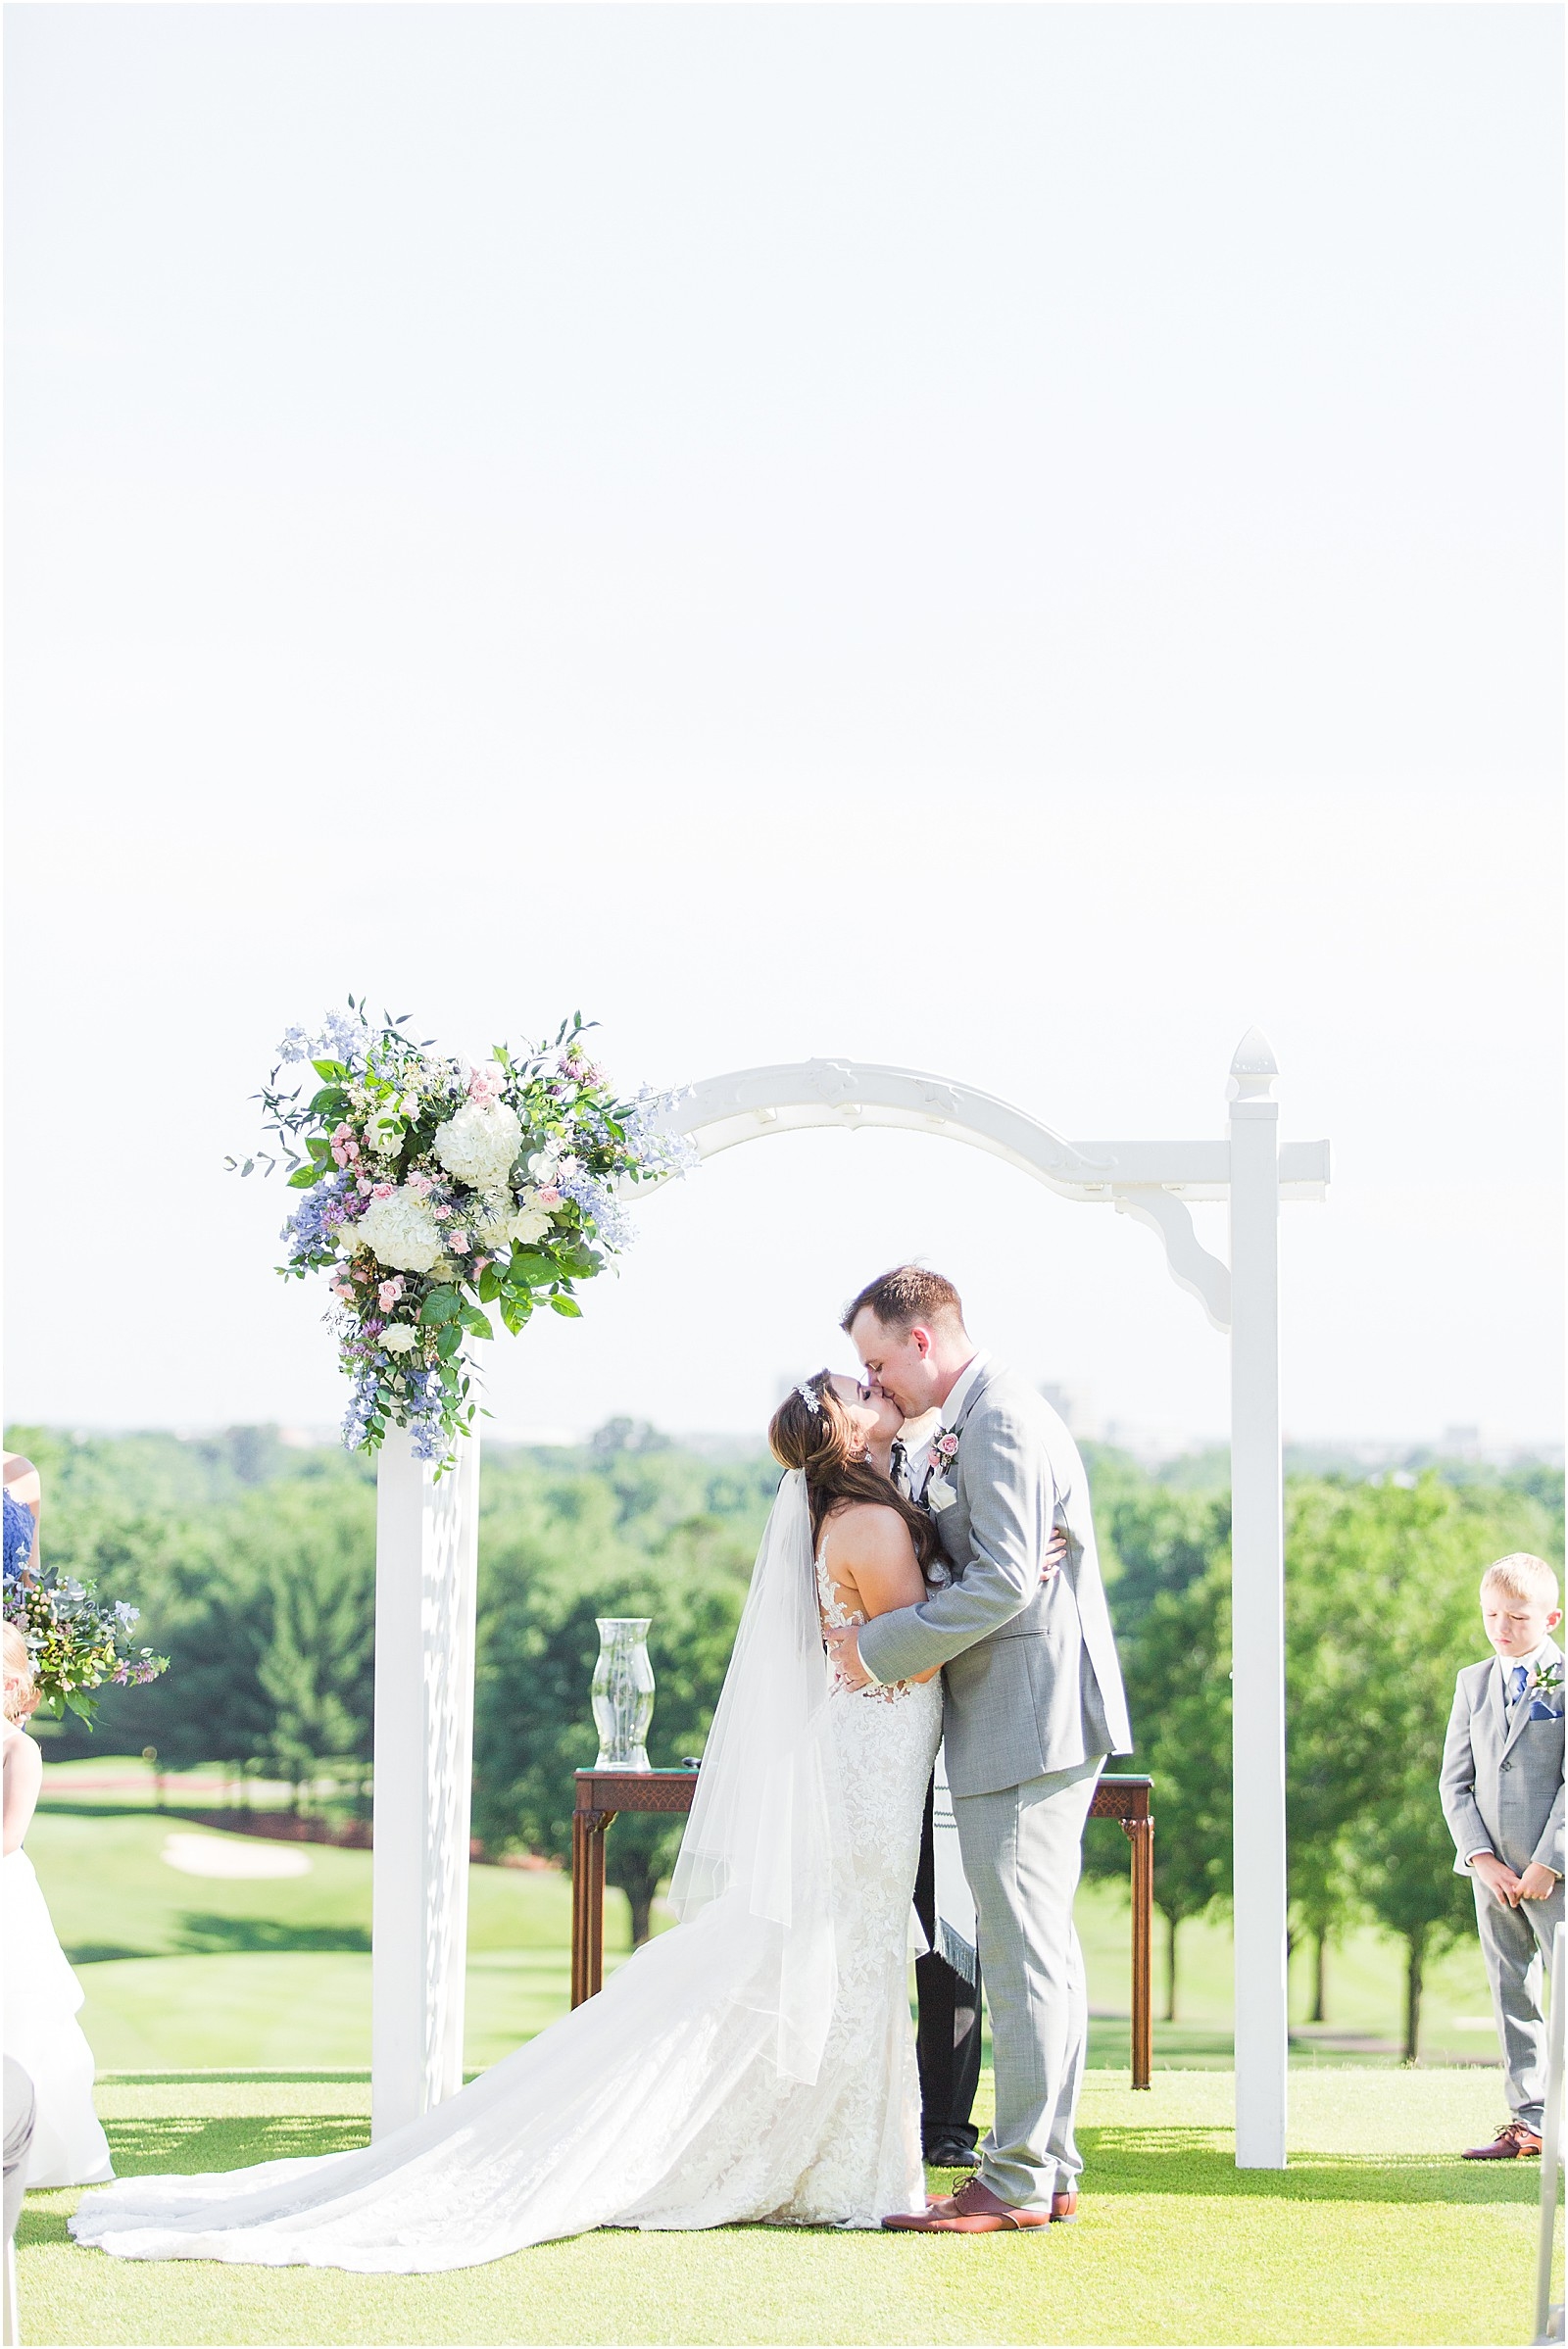 An Evansville County Club Wedding | Abby and Stratton 101.jpg